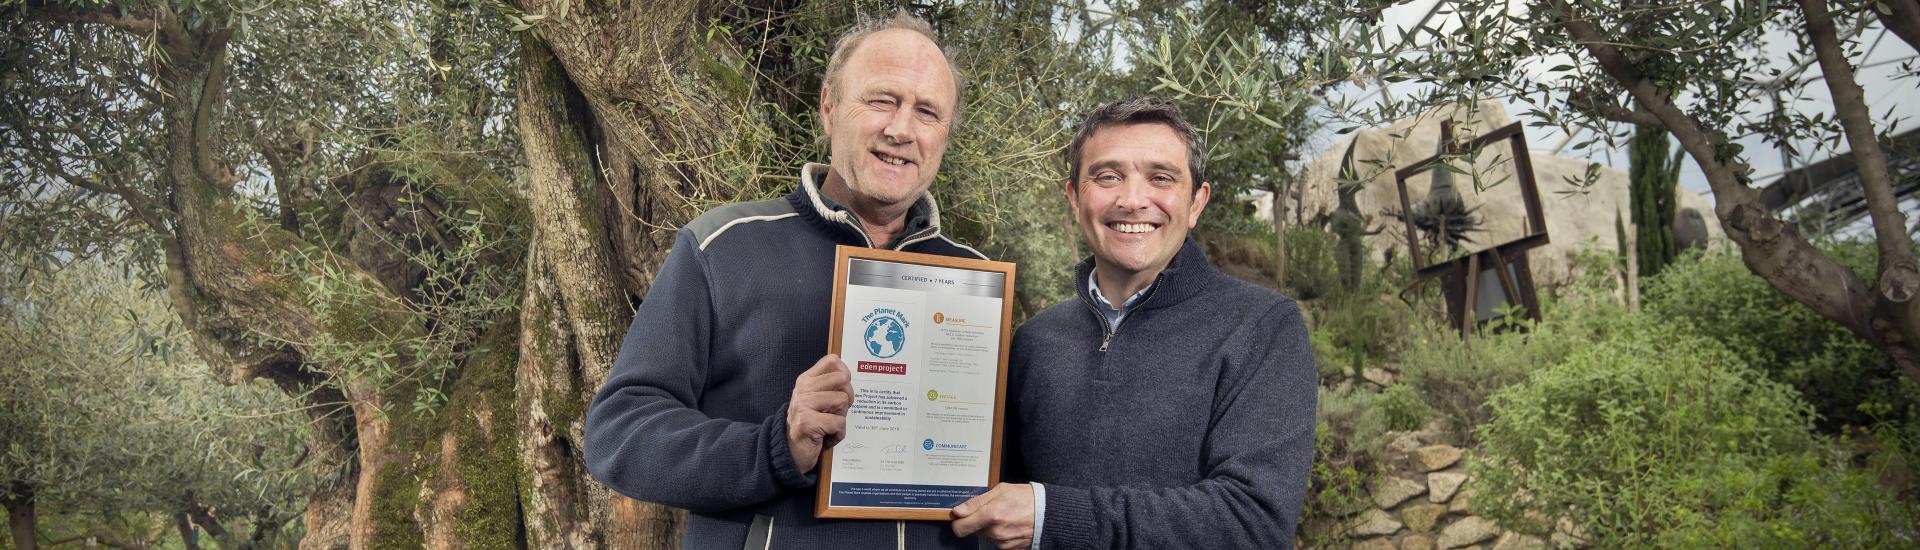 Co-founder of Eden Sir Tim Smit with Steve Malkin CEO of Planet First holding a certificate 